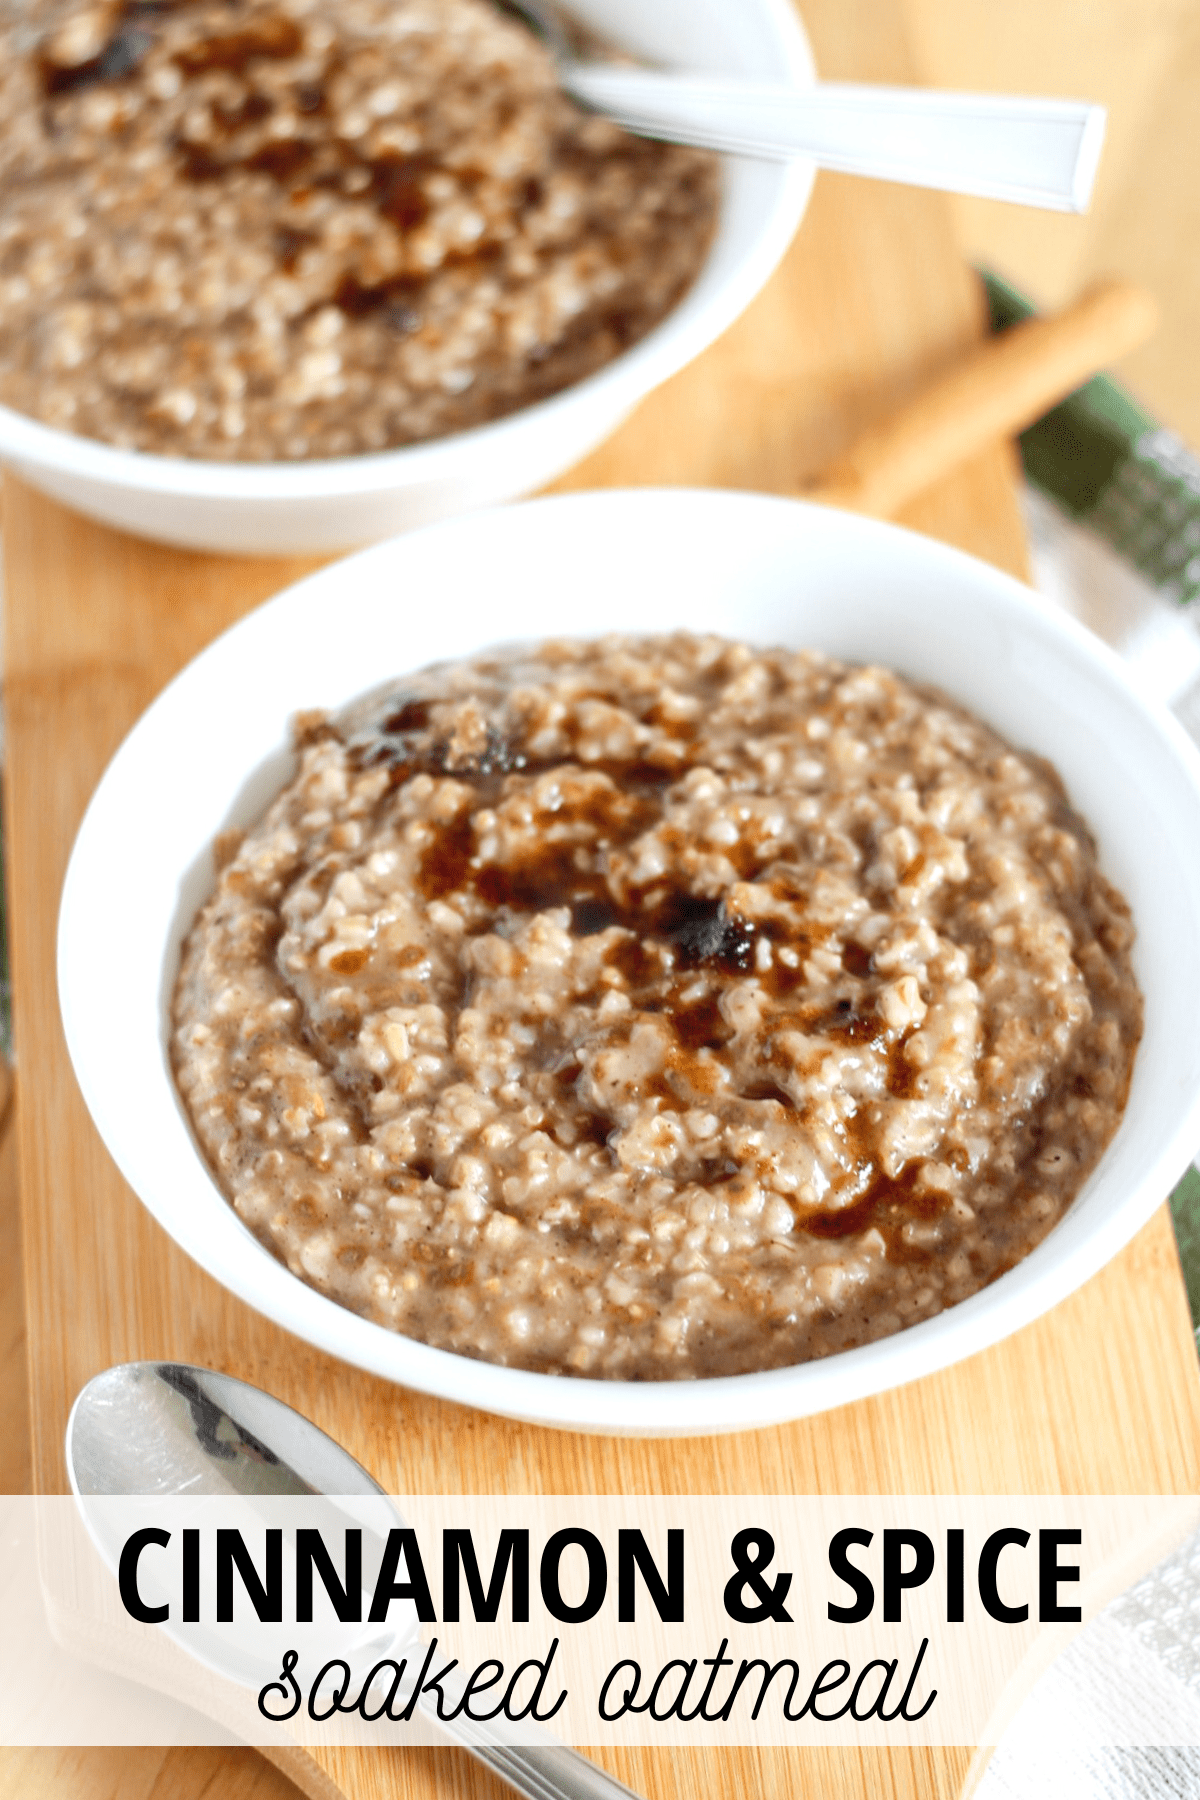 2 bowls of cinnamon and spice oatmeal